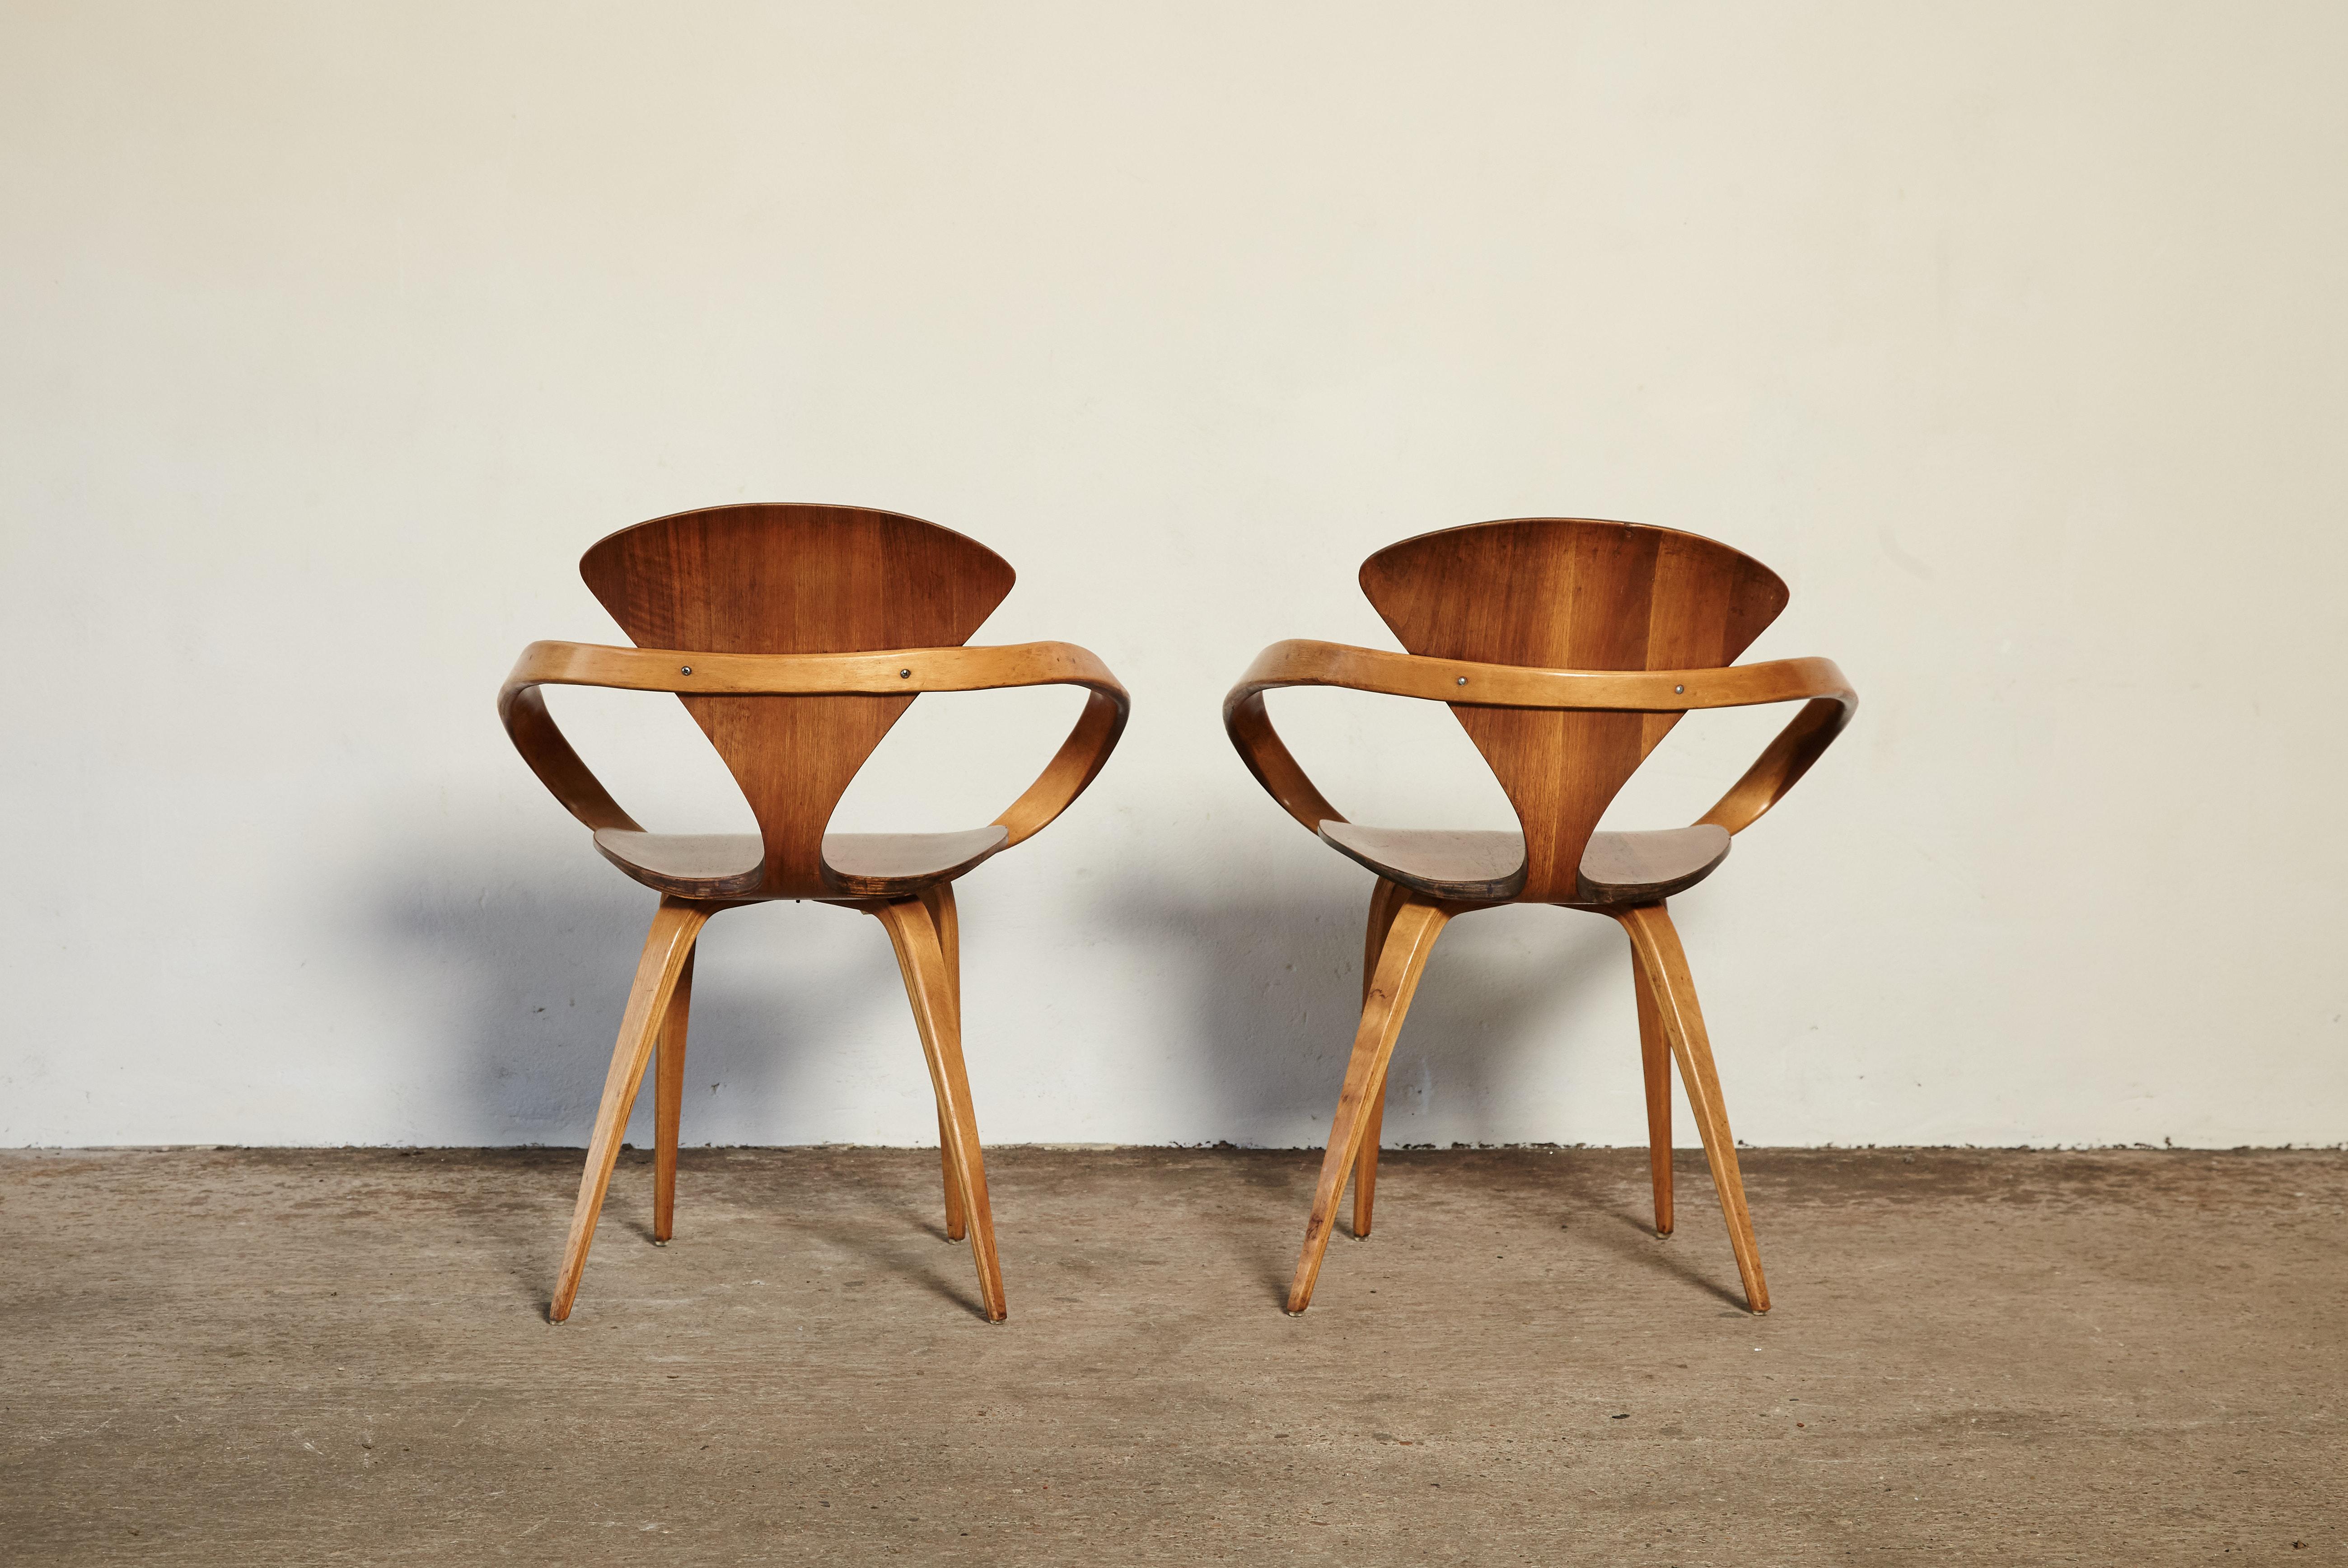 Wood Norman Cherner Pretzel Dining Chairs, Made by Plycraft, USA, 1960s